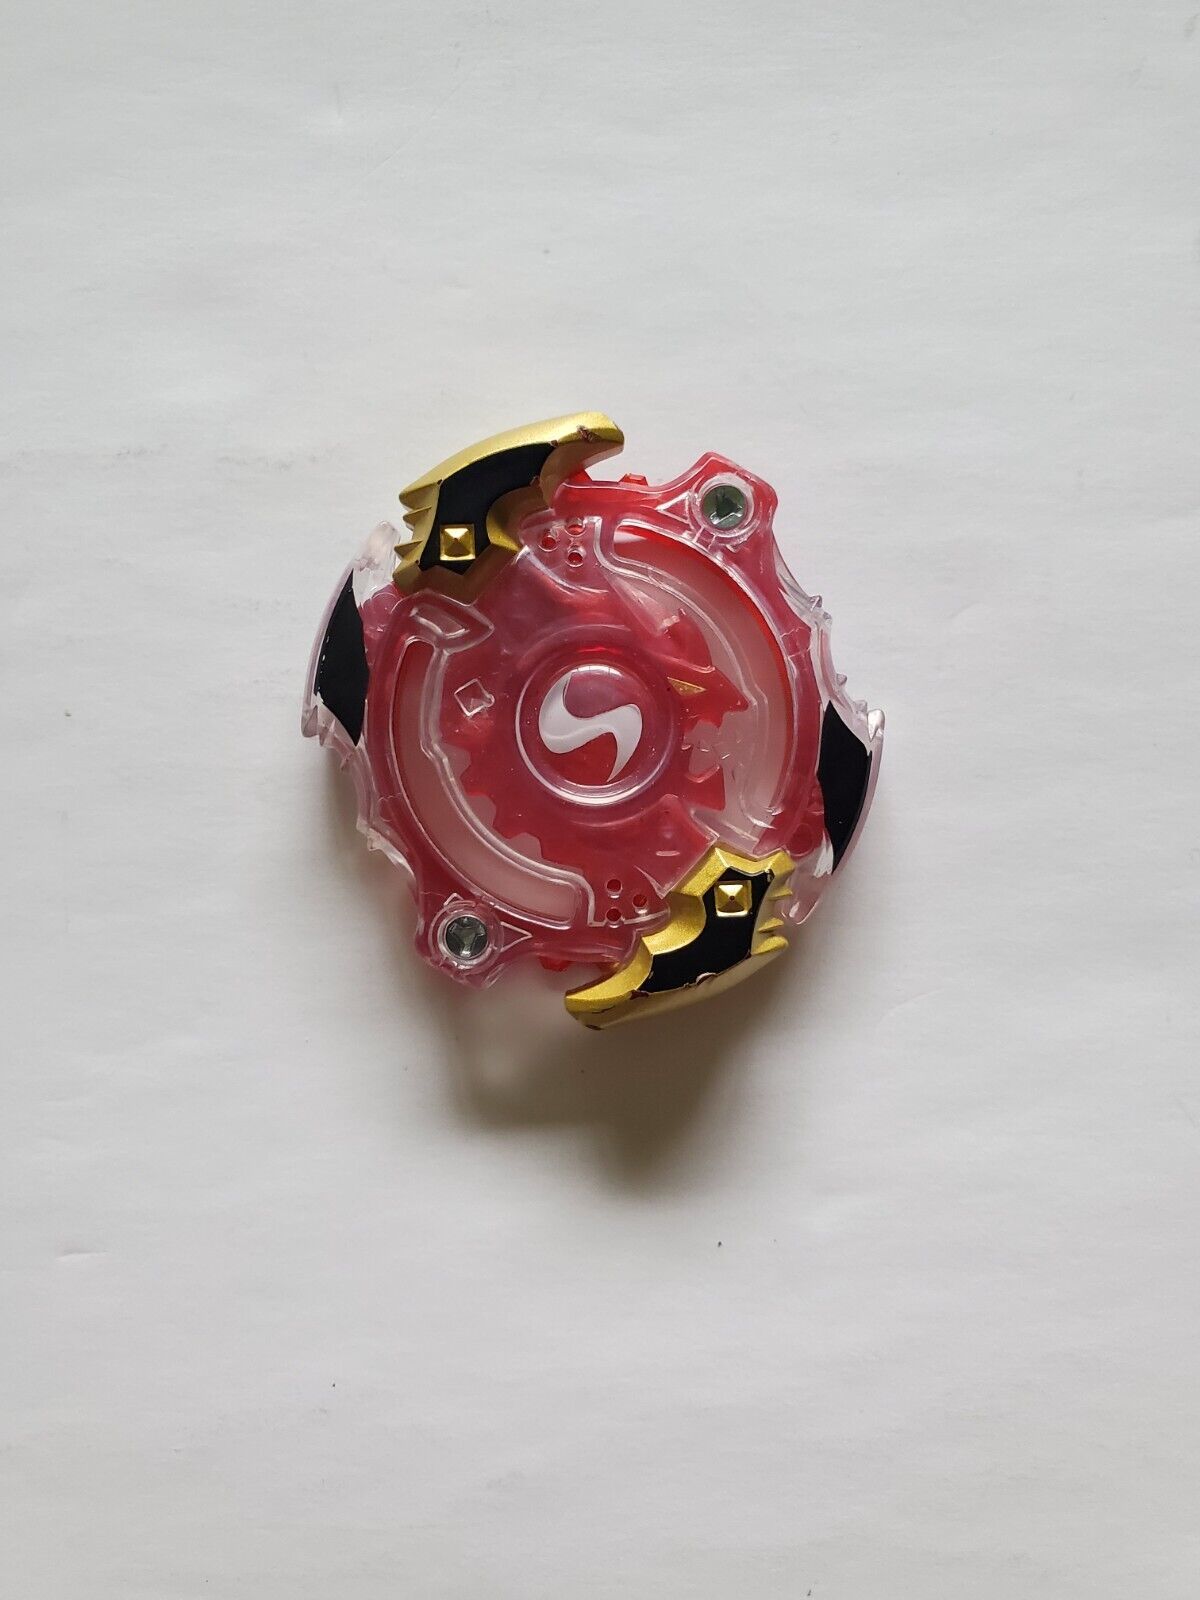 Primary image for Takara Tomy Beyblade Lot of 4 